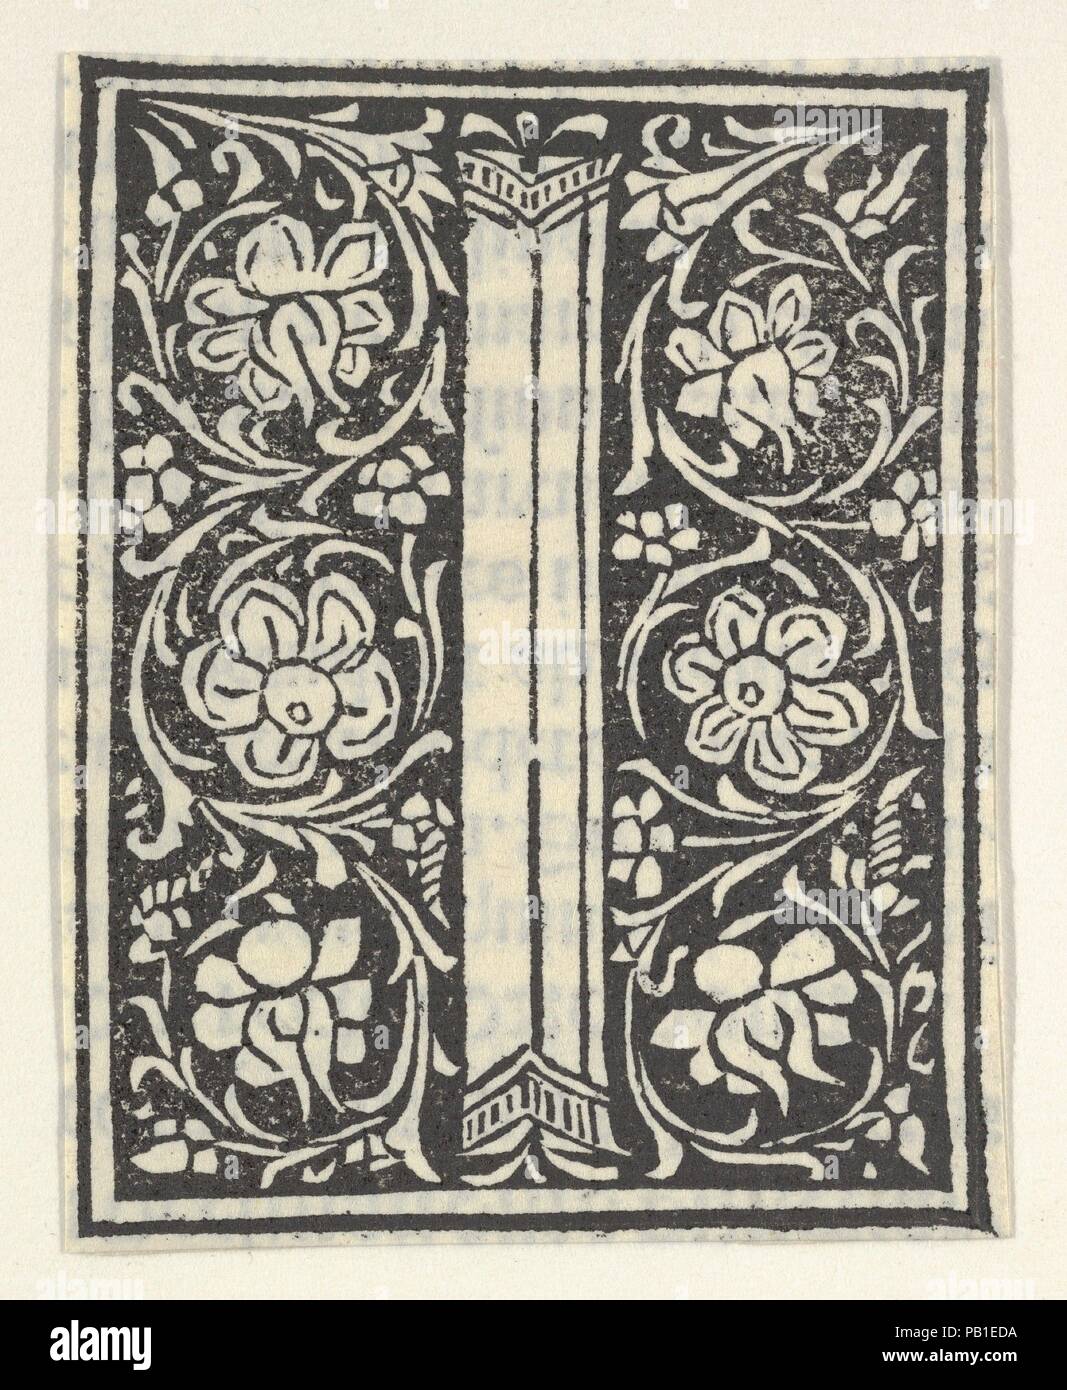 Initial letter I with flowers. Artist: Anonymous, Italian, 15th century. Dimensions: Sheet: 2 3/8 × 1 13/16 in. (6 × 4.6 cm). Date: 1496. Museum: Metropolitan Museum of Art, New York, USA. Stock Photo